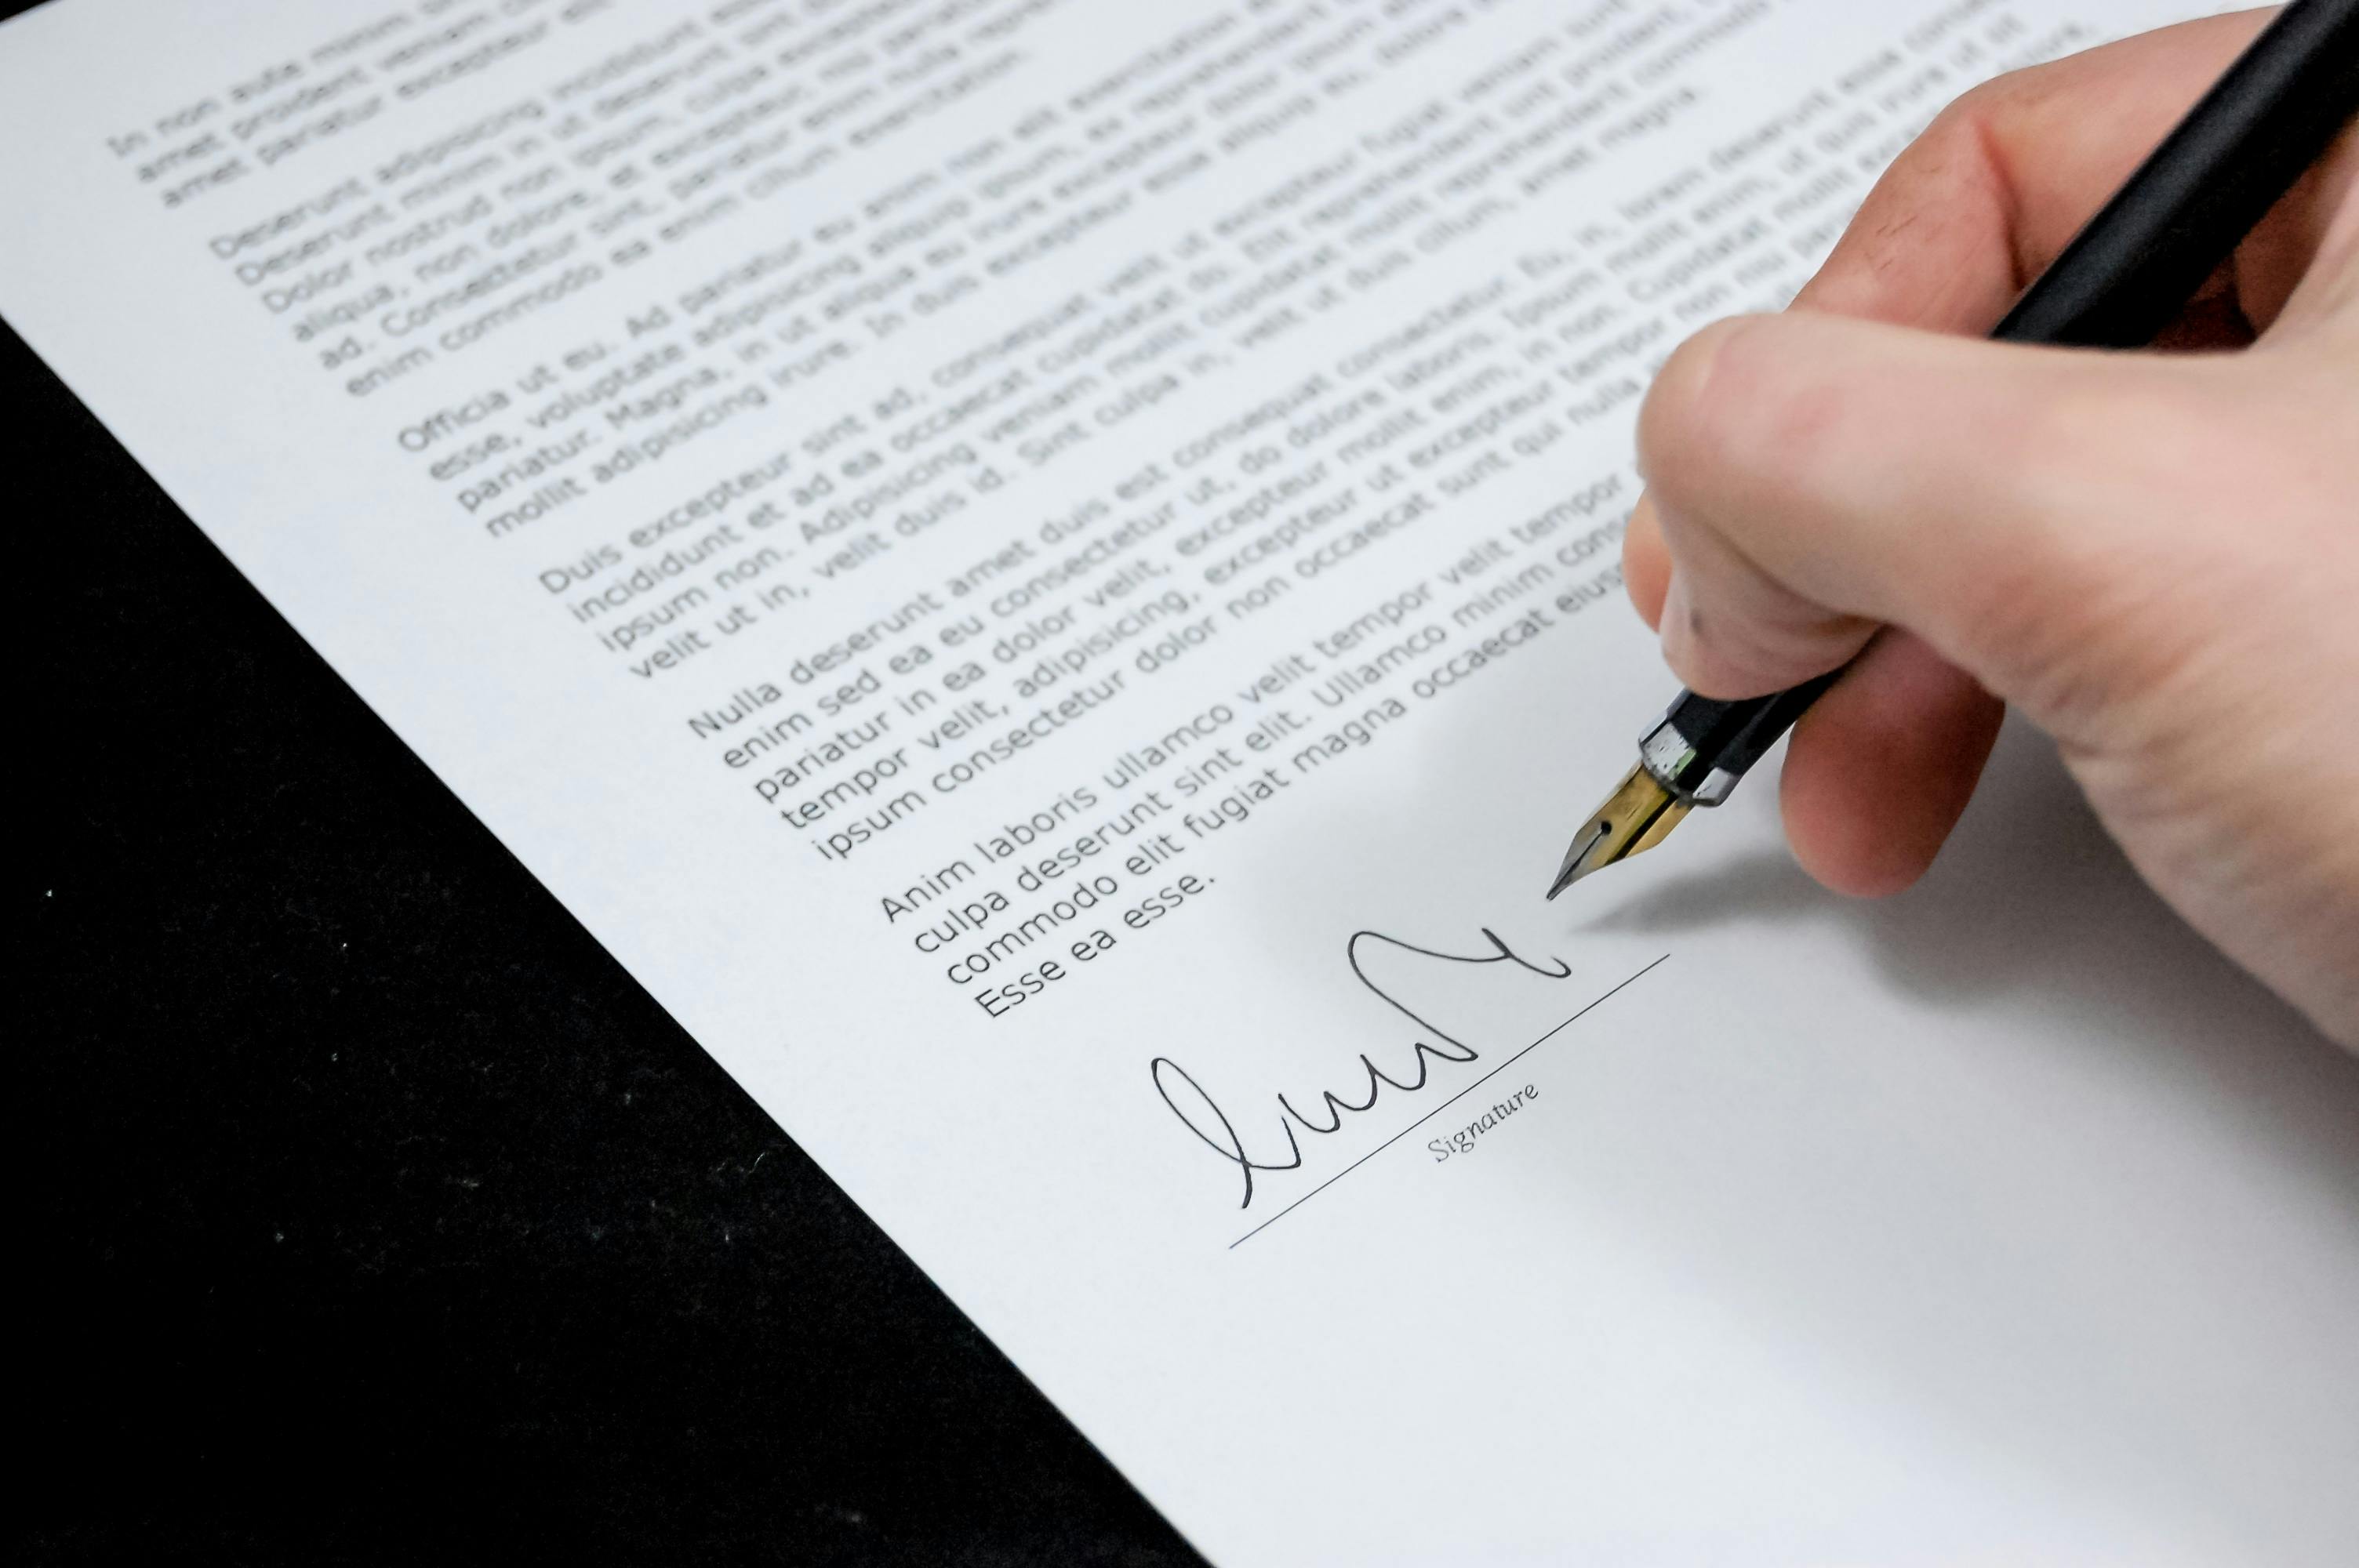 A person signing a document | Source: Pexels